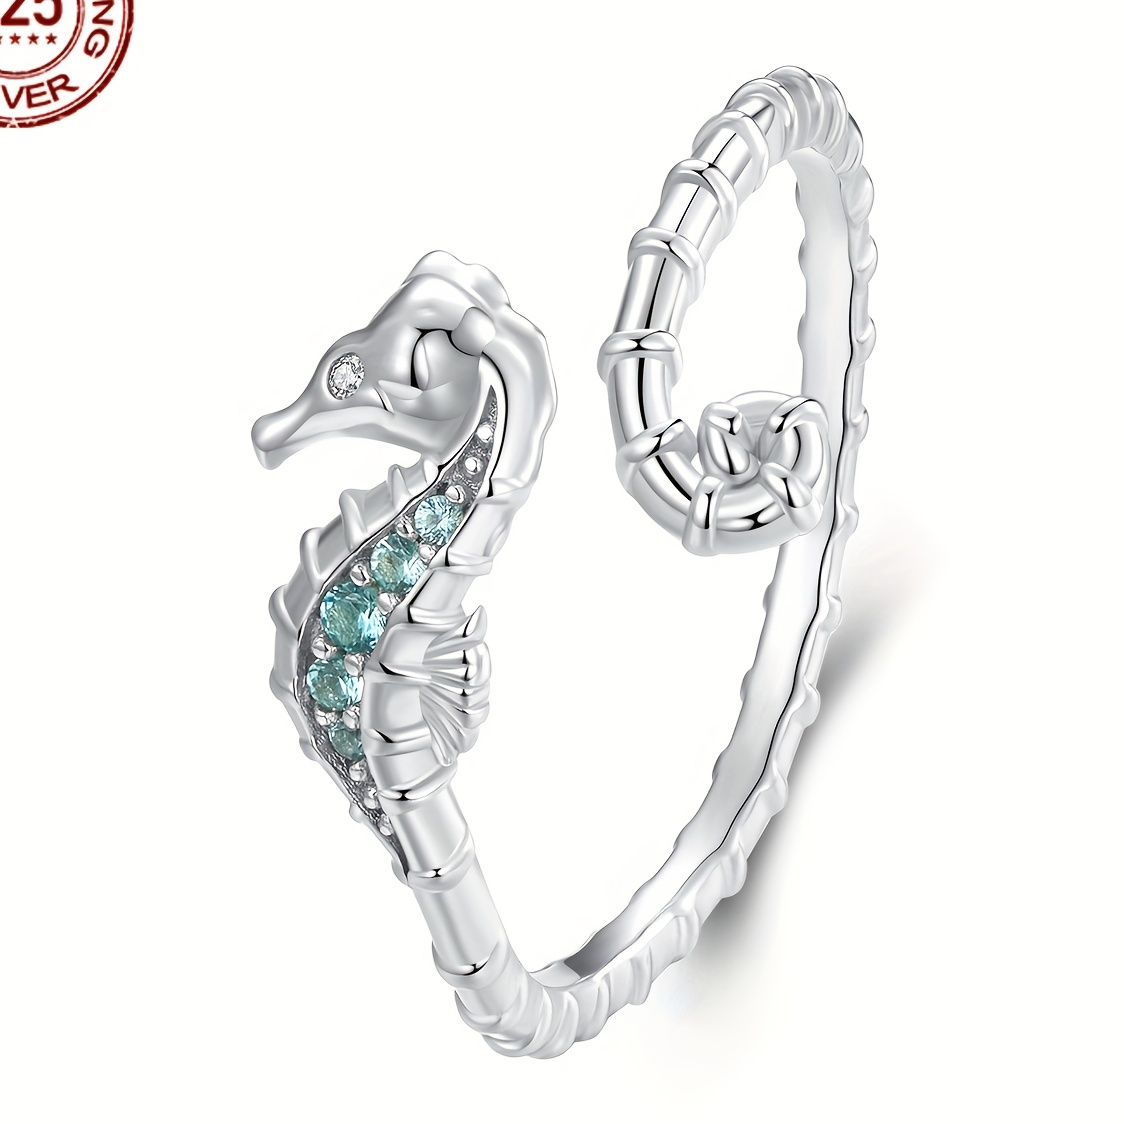 

Elegant 925 Sterling Silver Seahorse Ring With Turquoise Details, Animal Inspired Charm Jewelry, Hypoallergenic, Power-free Accessory